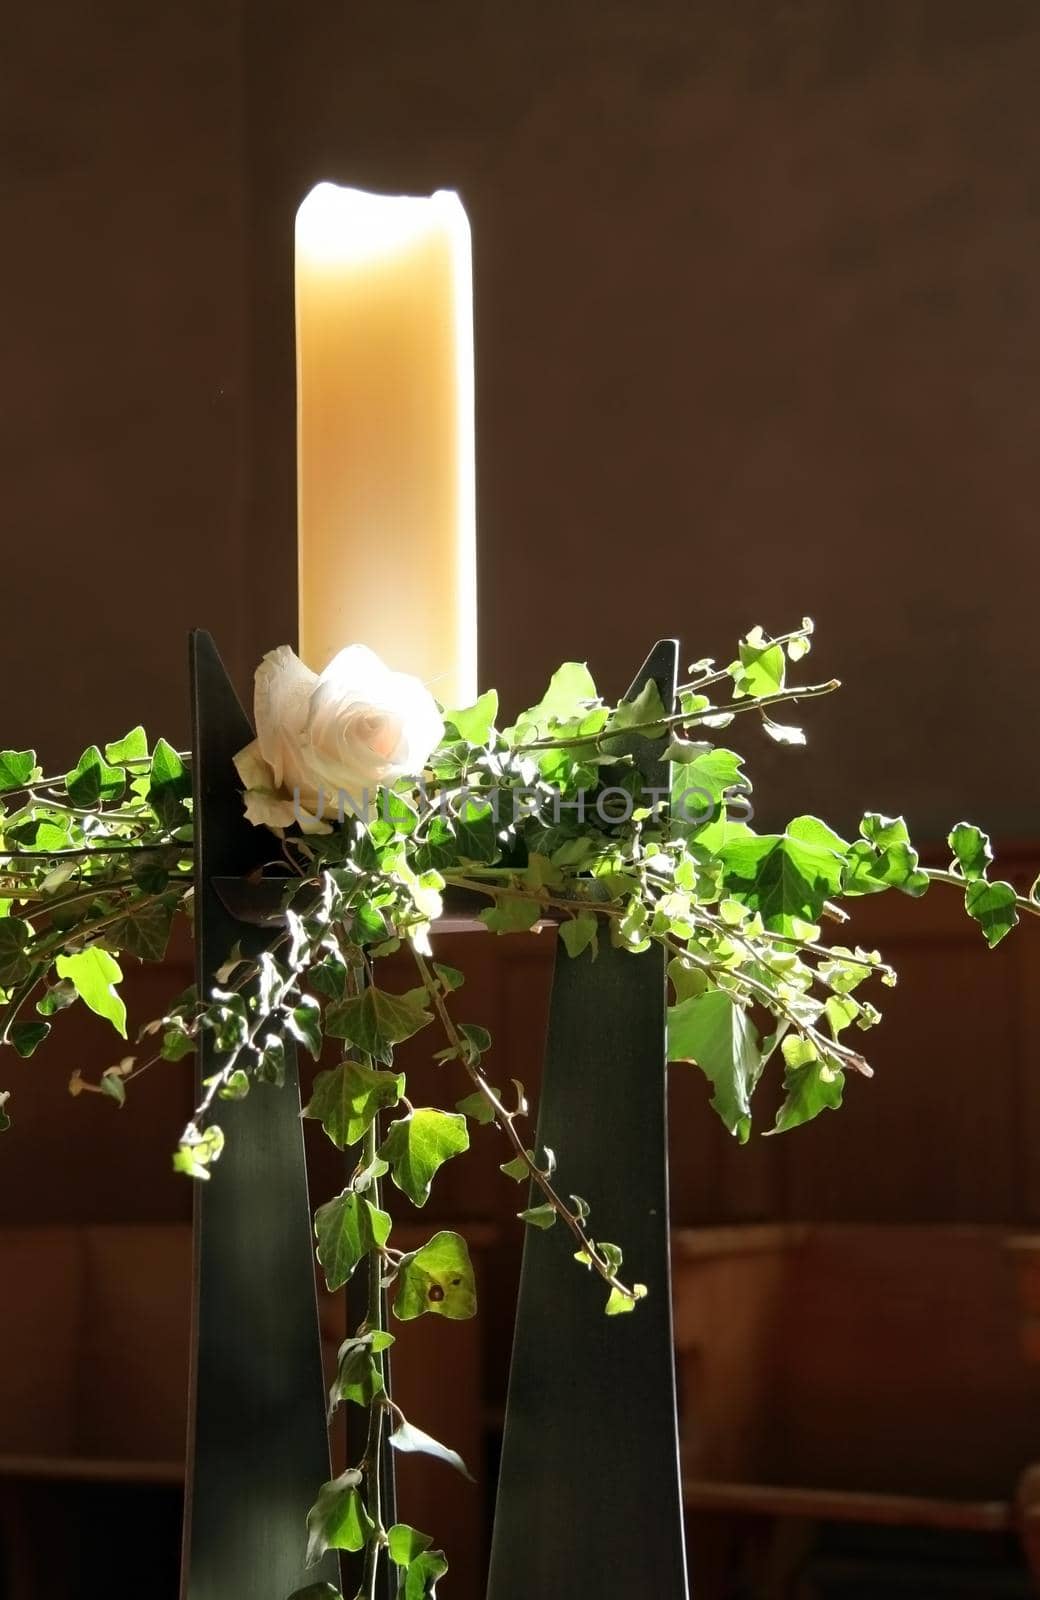 Decorated candle in a church with backlighting